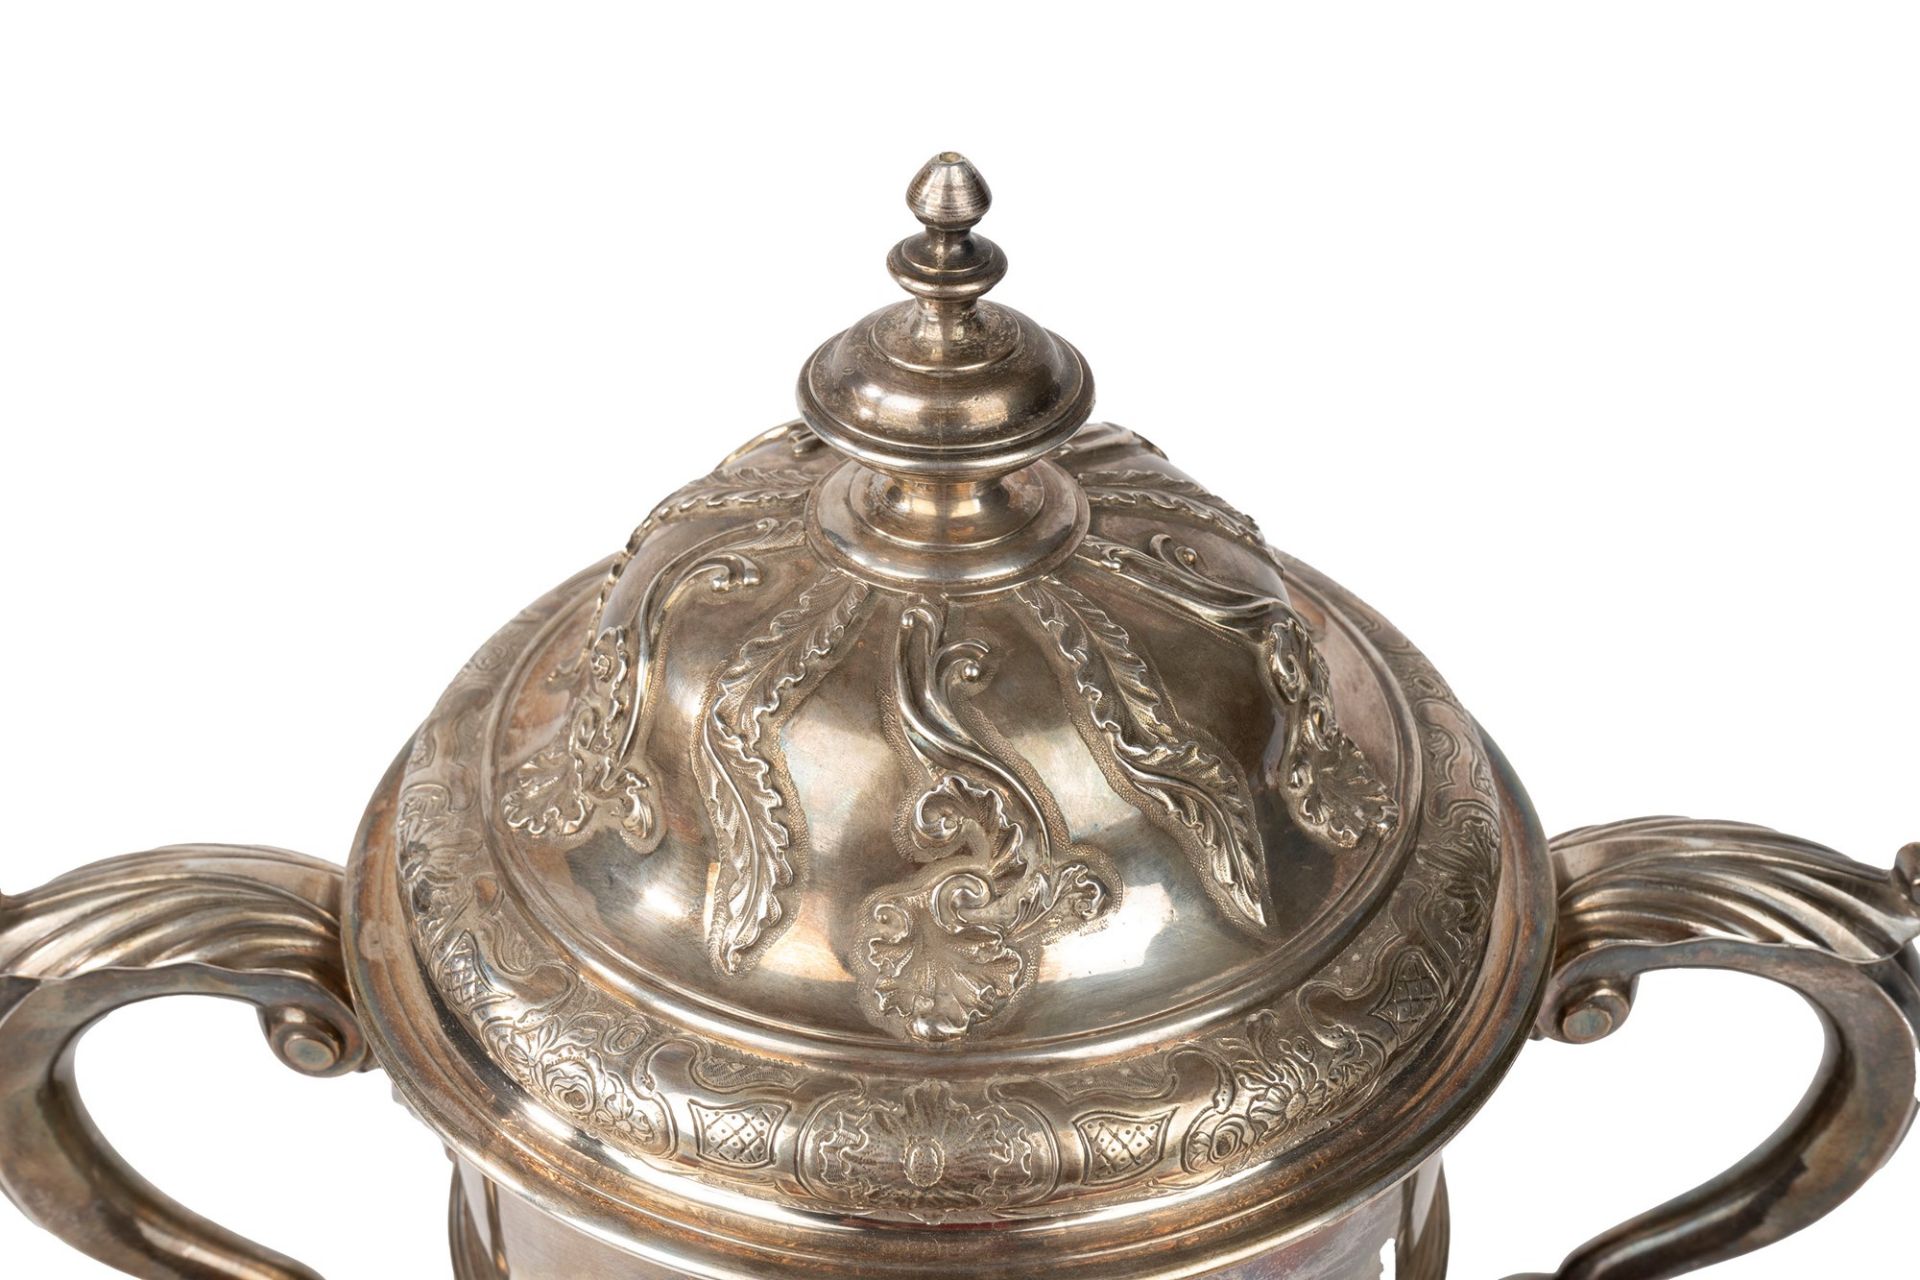 Silver cup, London, England 1737 - Image 4 of 5